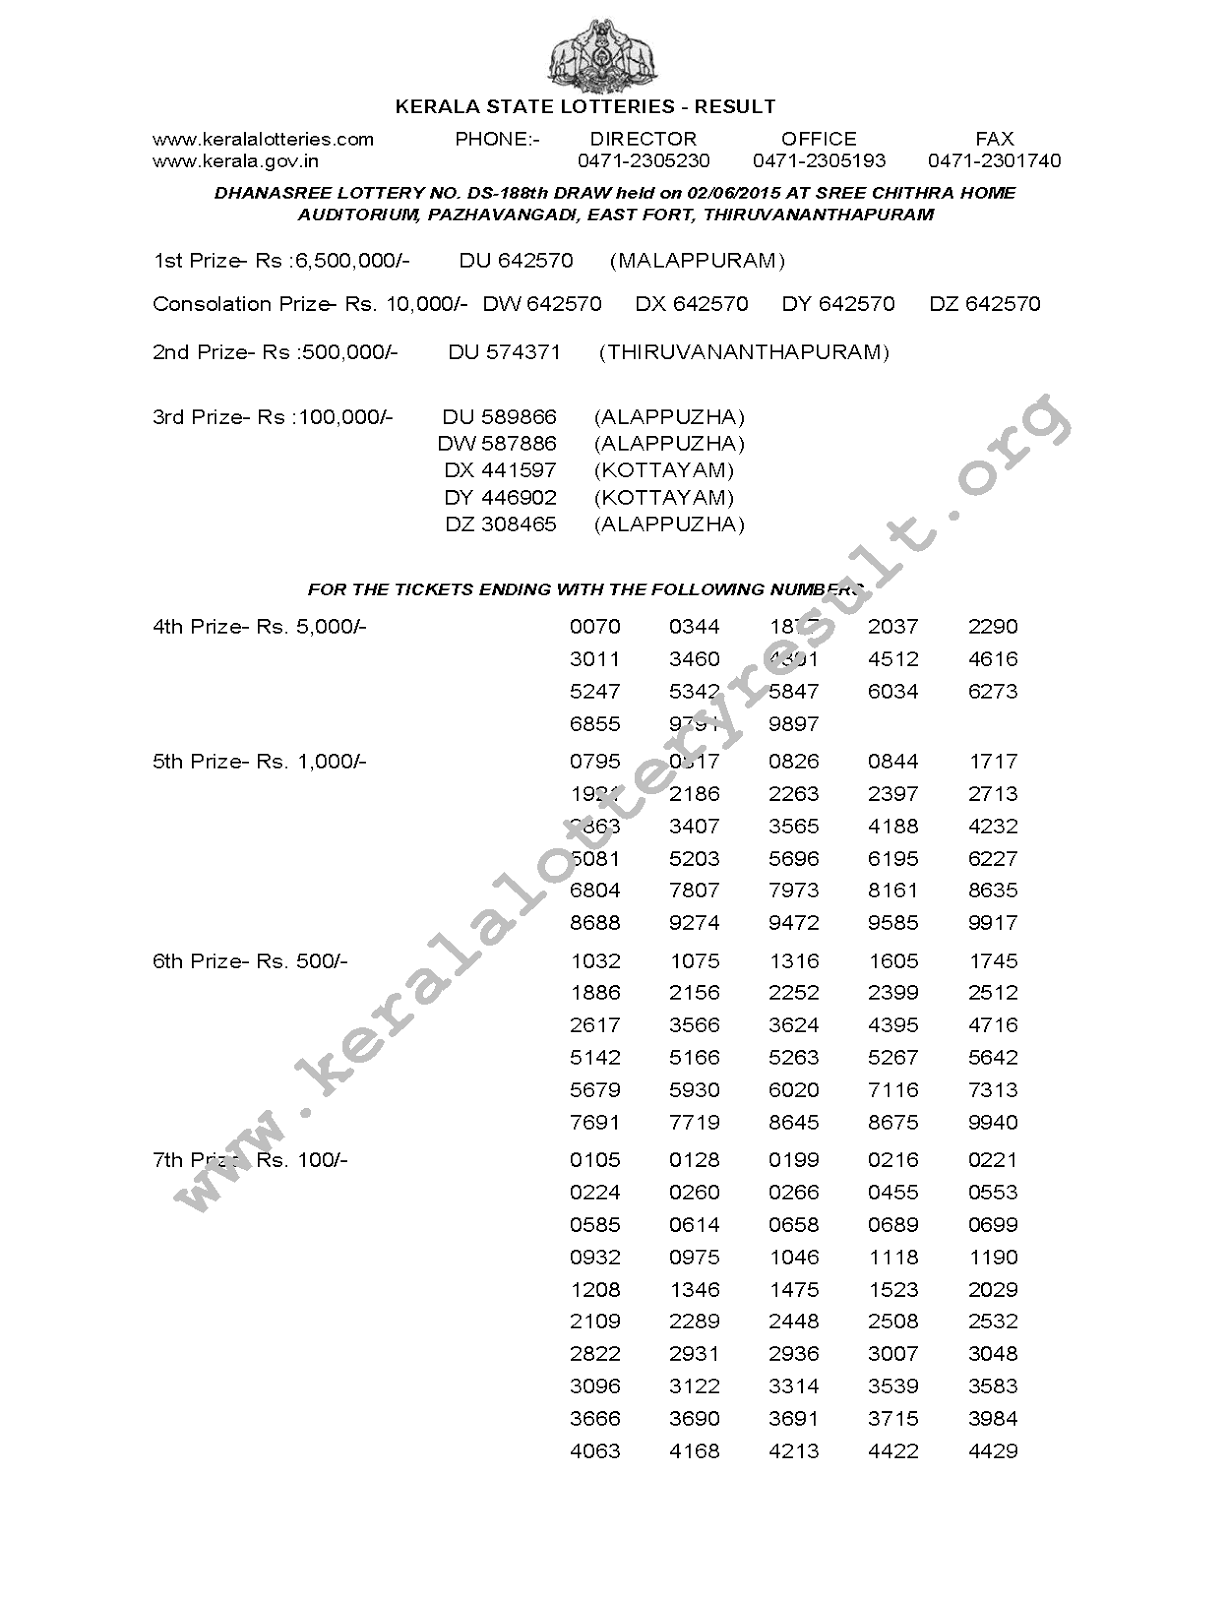 DHANASREE Lottery DS 188 Result 2-6-2015